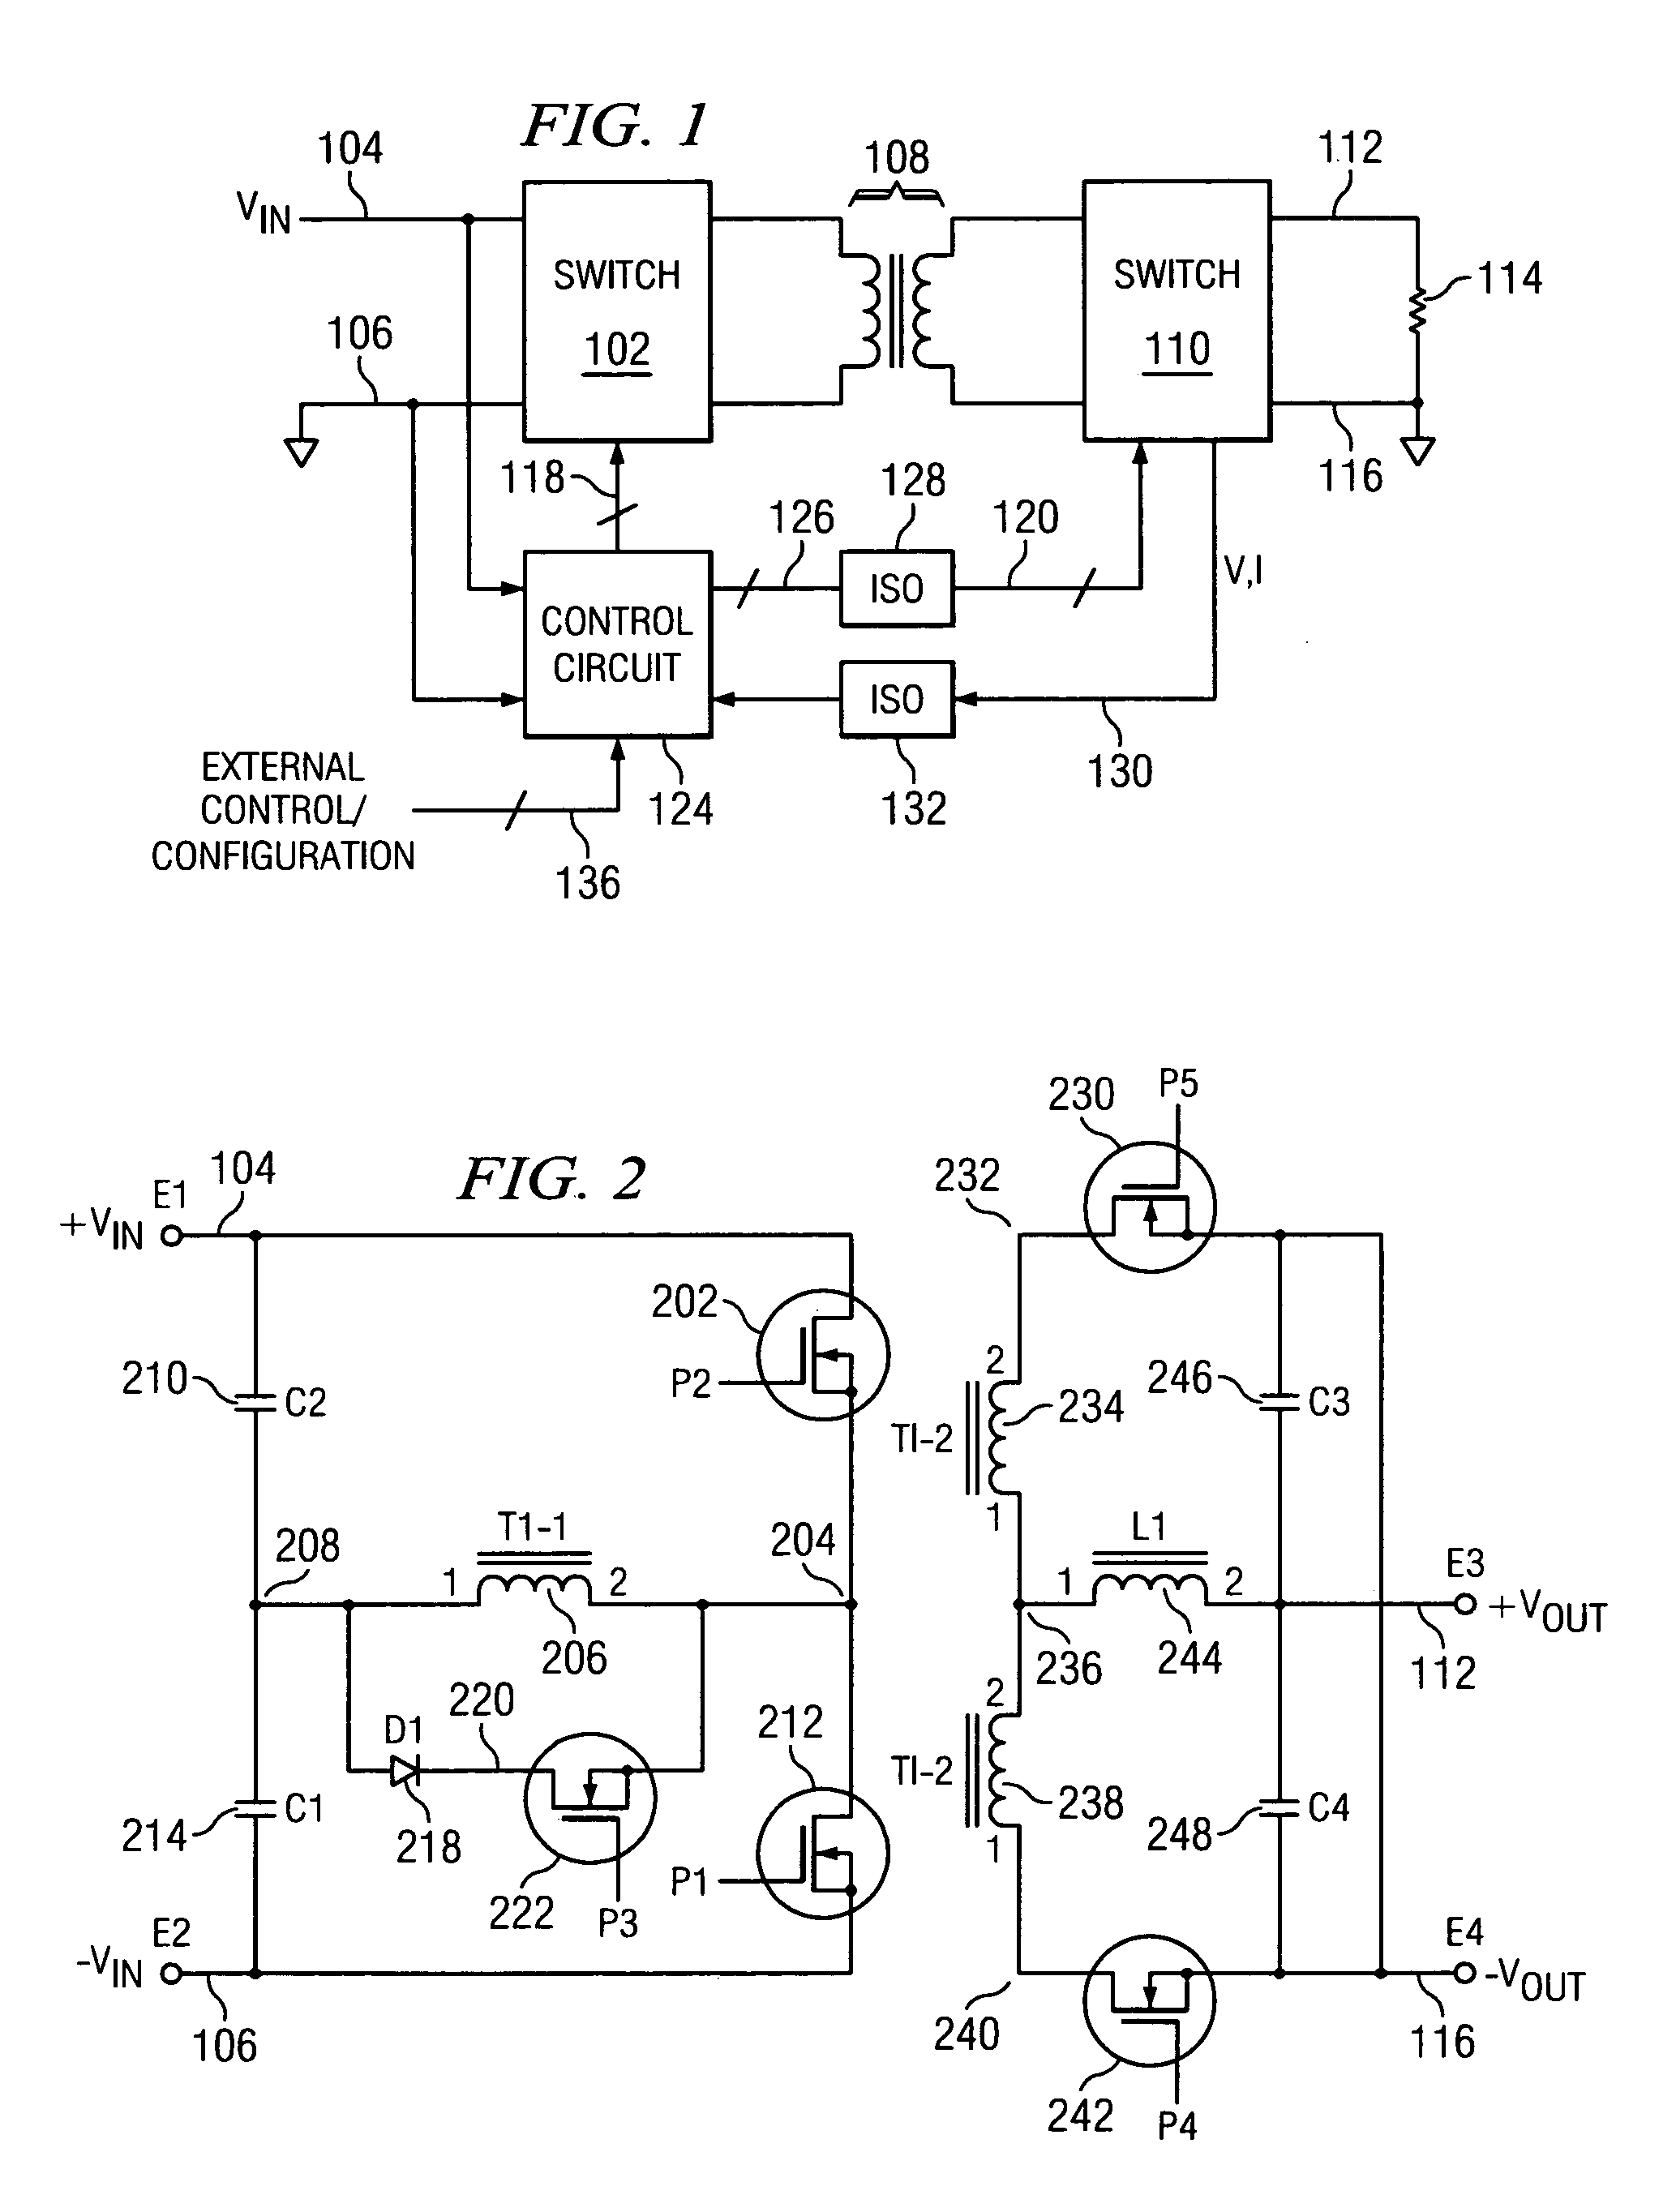 Non linear controlled power supply with a linear soft start operation